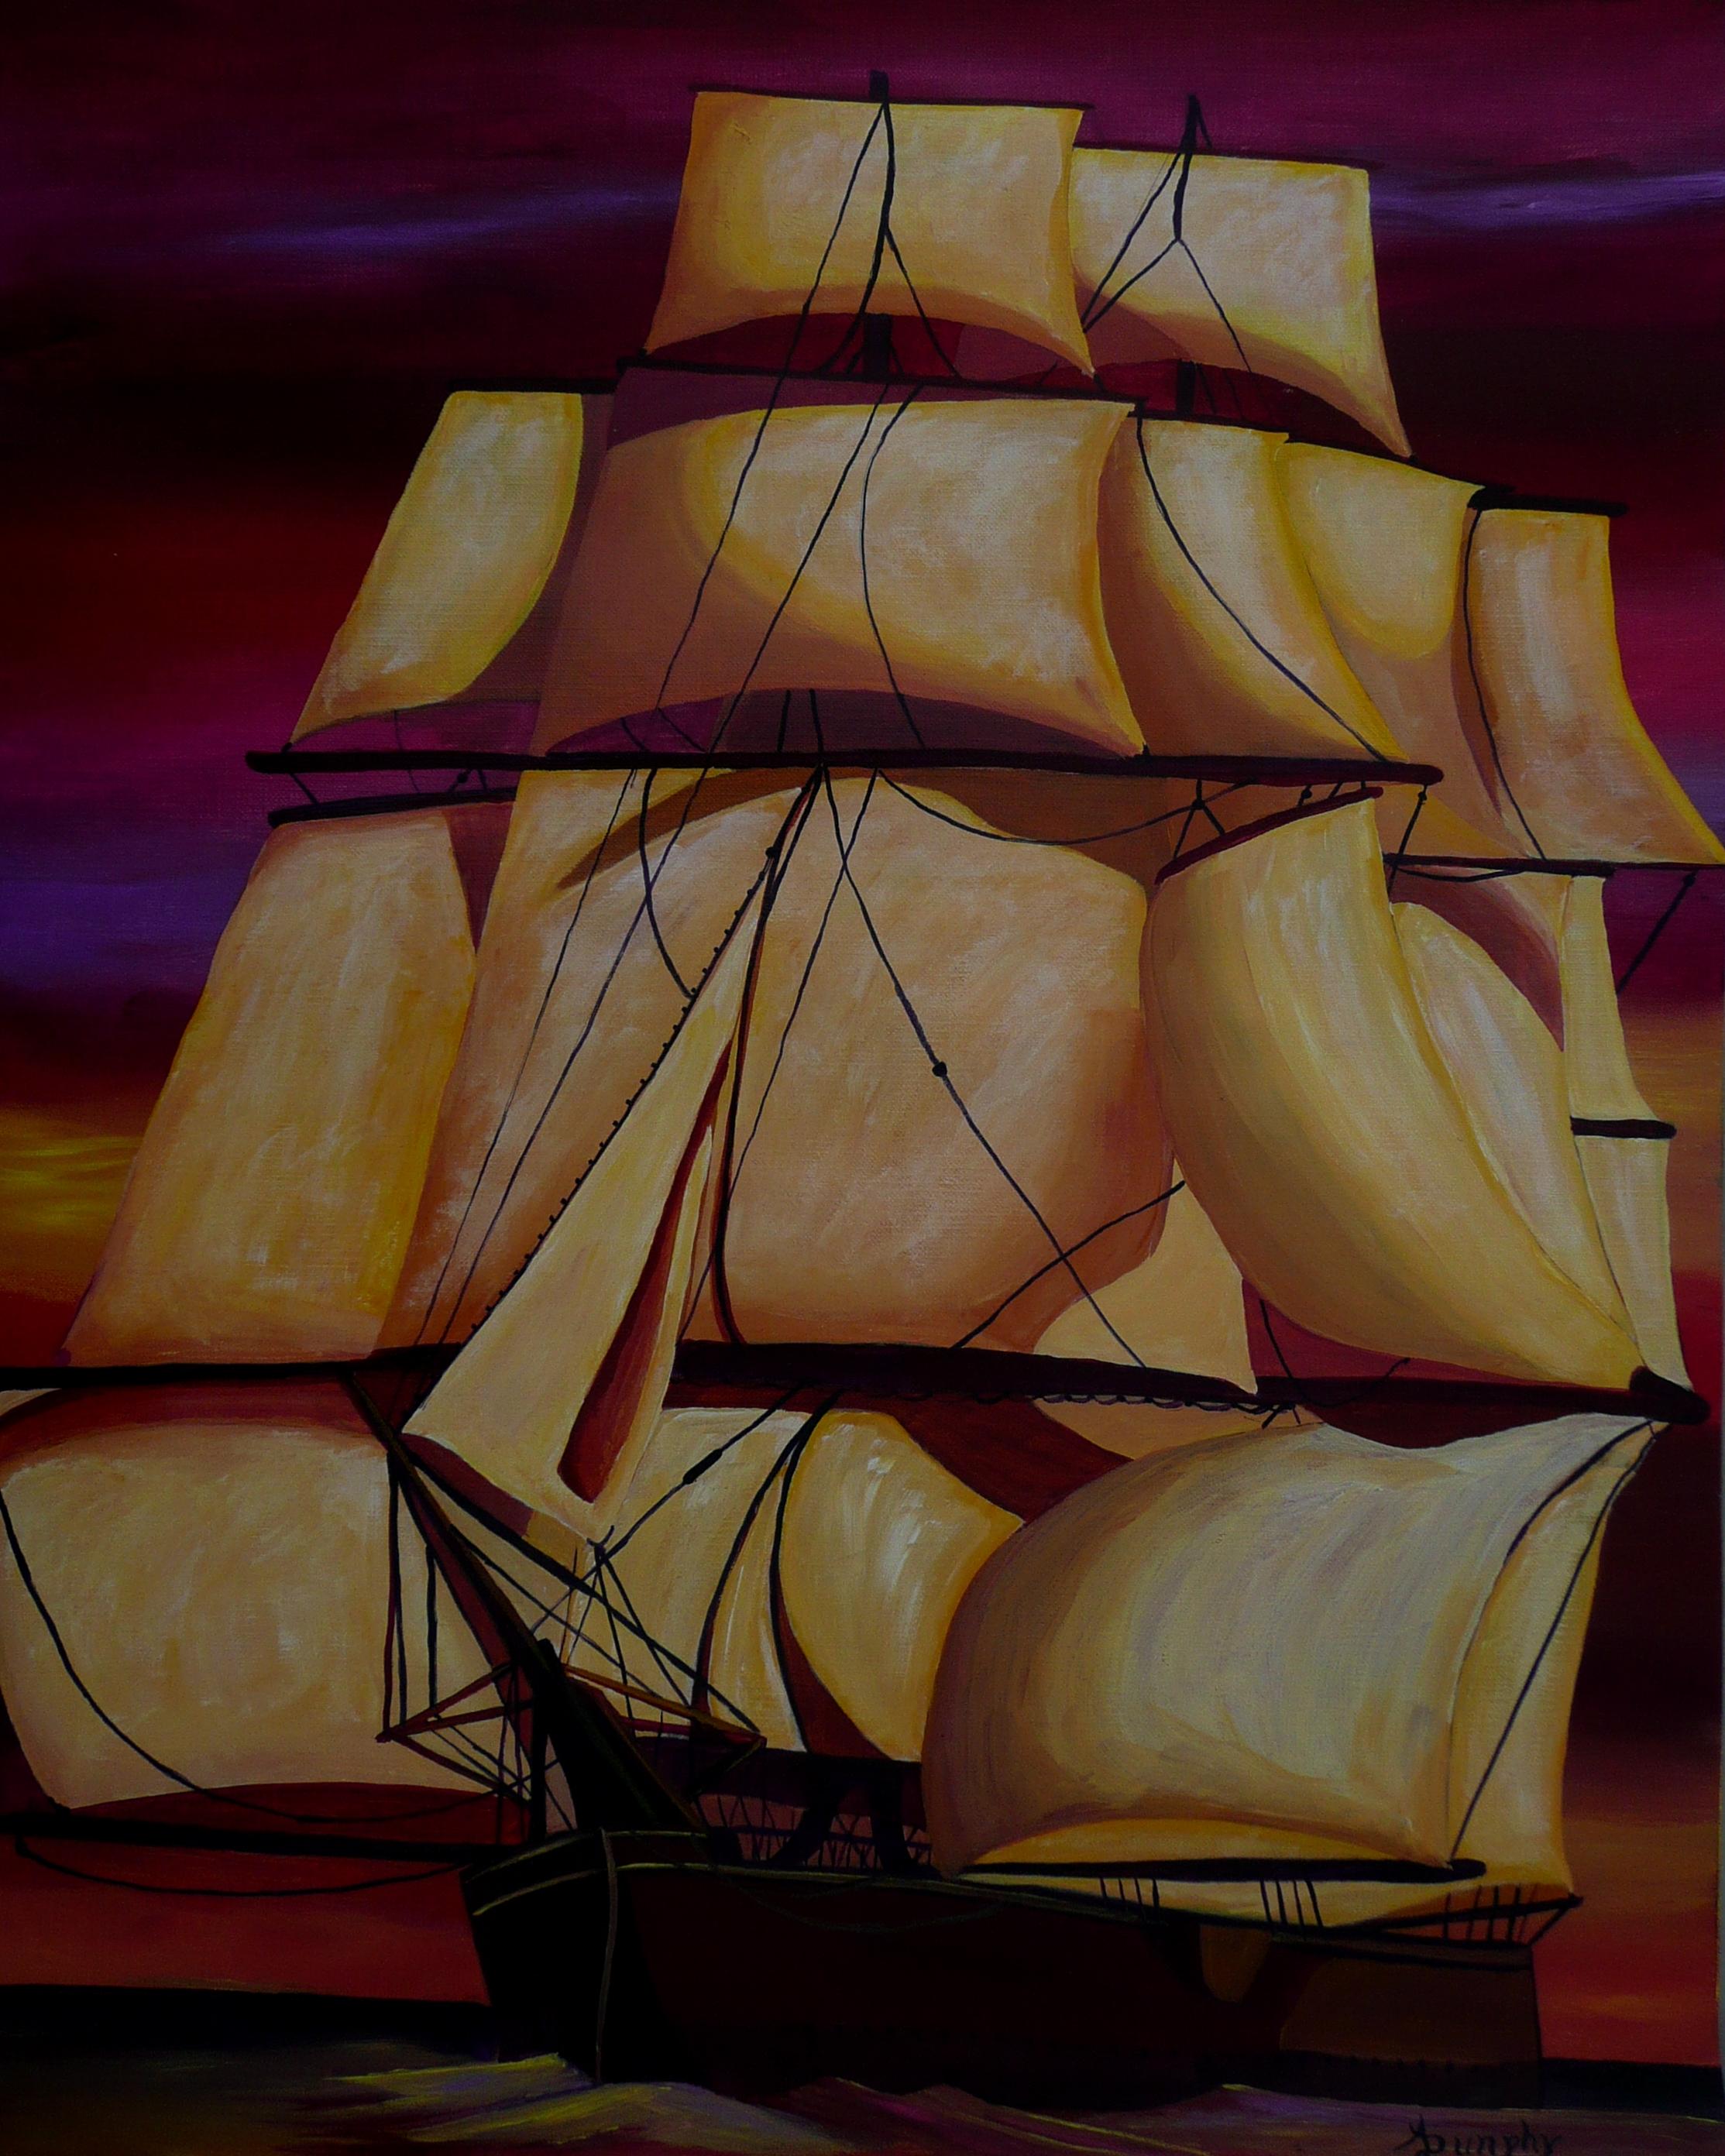 This 20X16 inch or 50X40 centimeter acrylics on archival quality canvas paper painting depicts the HMS Calypso under her full compliment of sails at sea during a vivid sunset with the light catching all her sails.It has been given a coat of clear